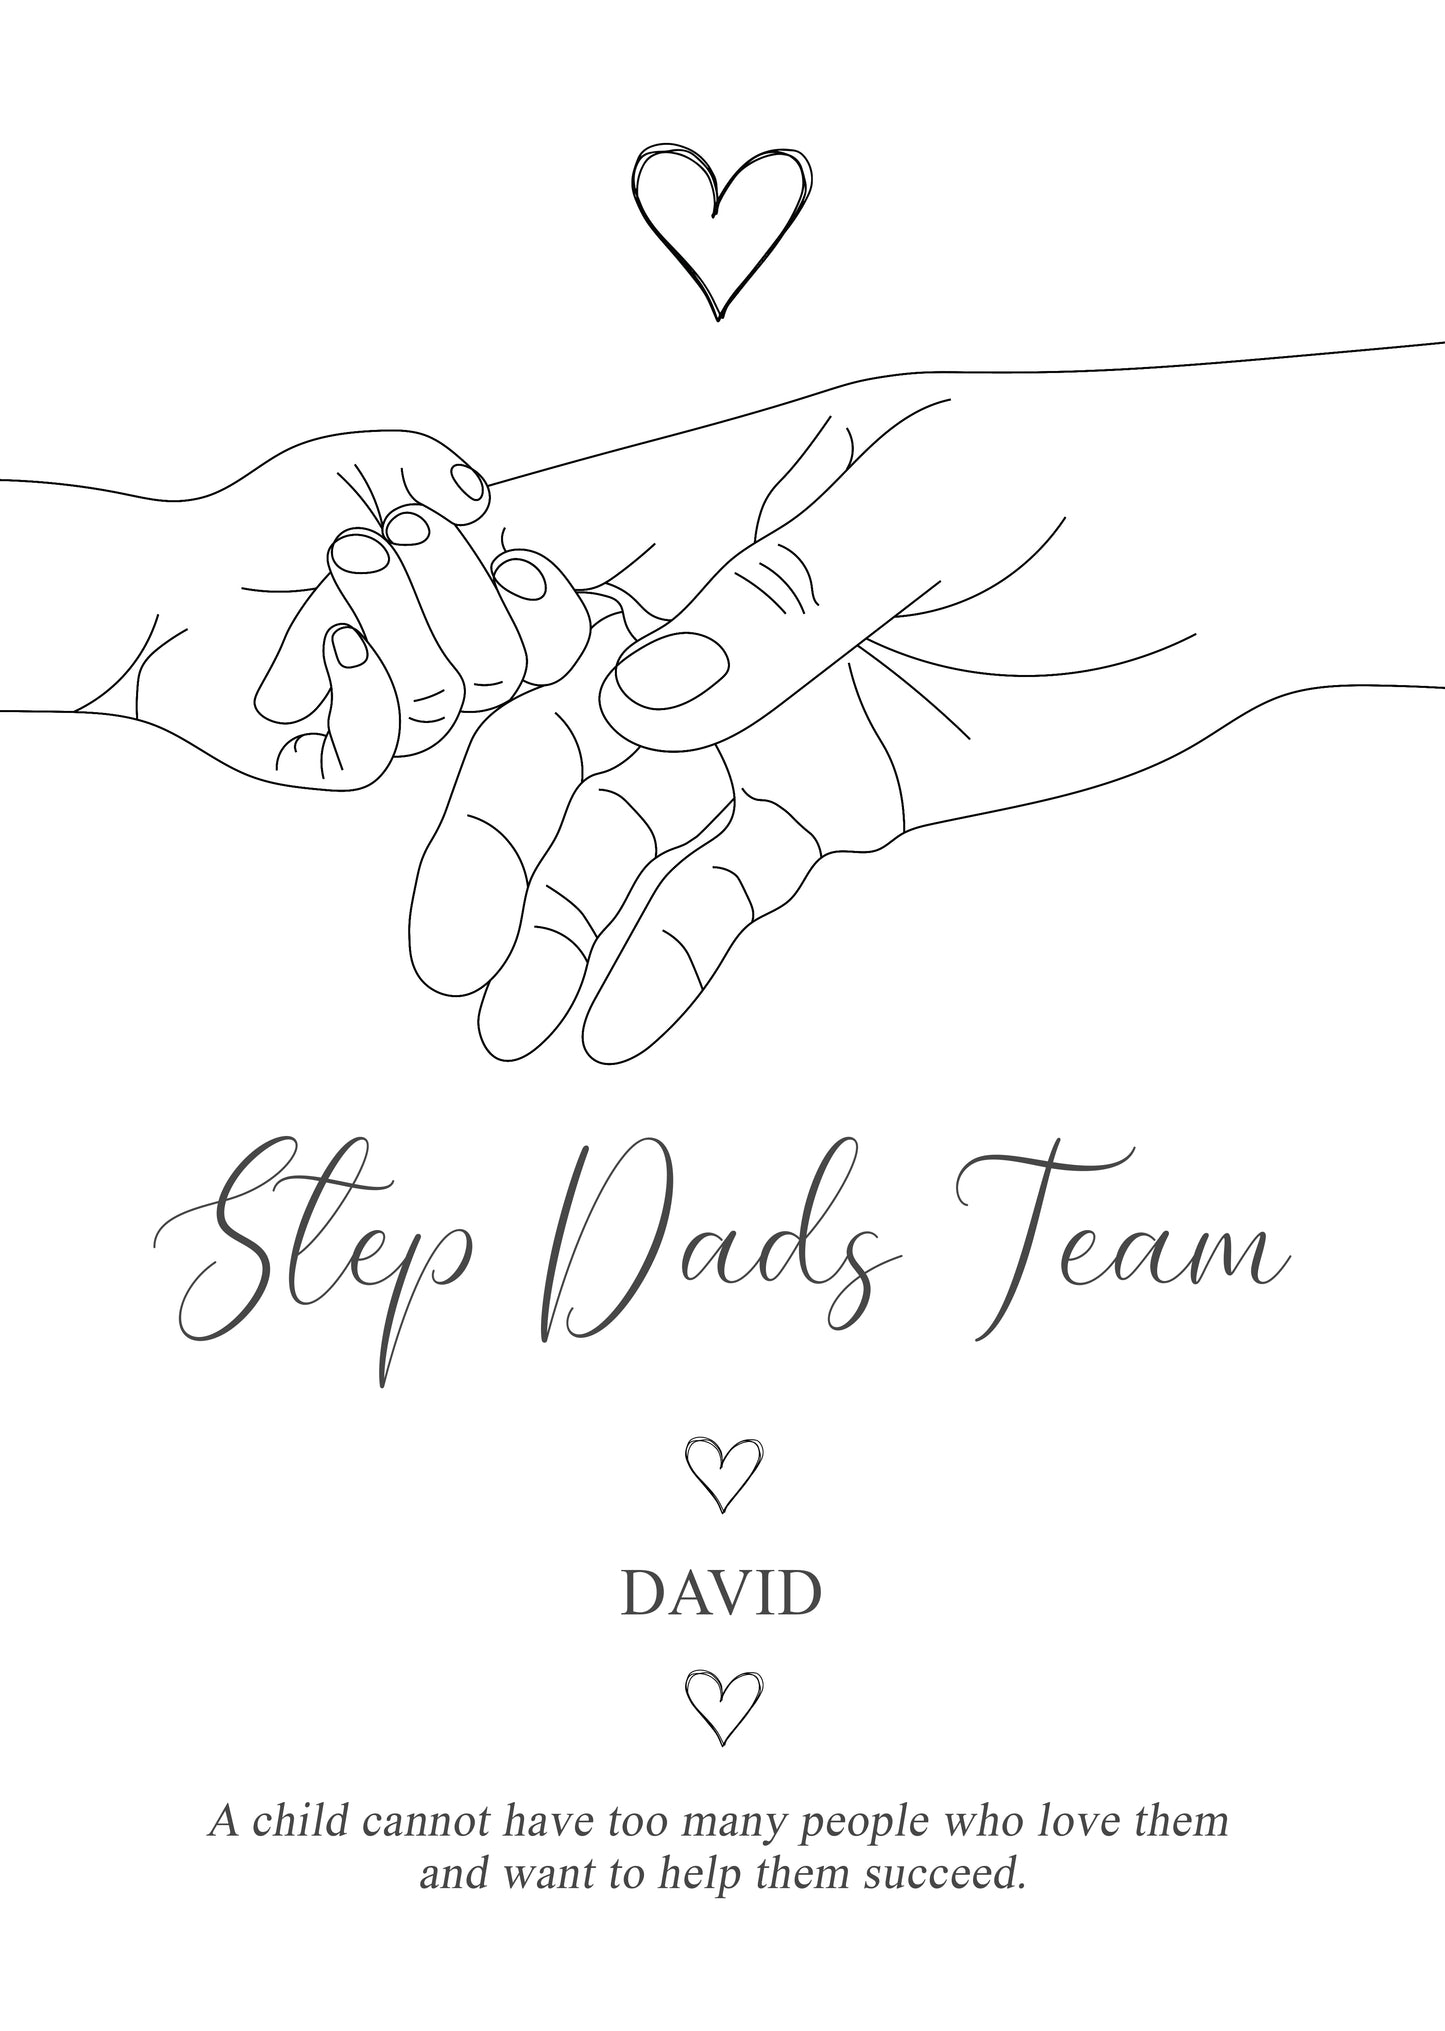 Holding On Personalised Print